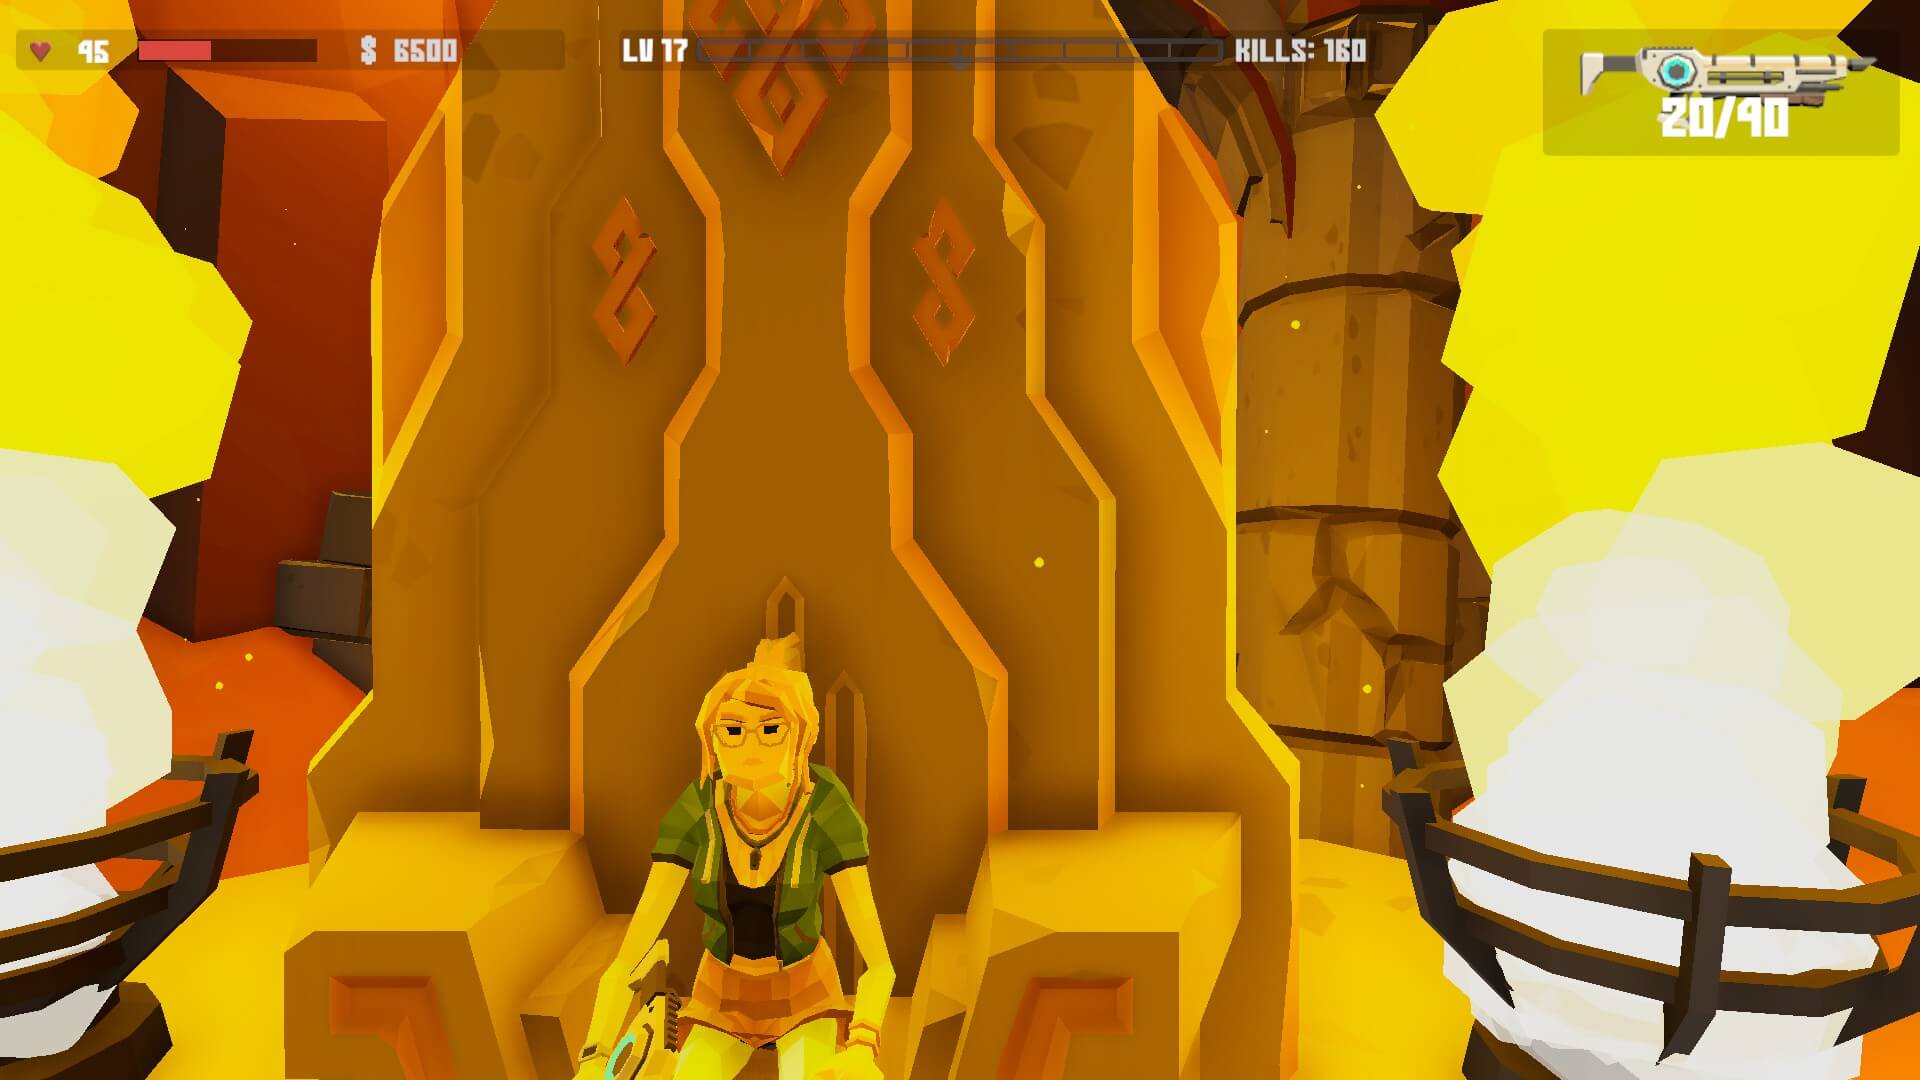 Our hero is sitting on a giant throne with two large braziers beside it.